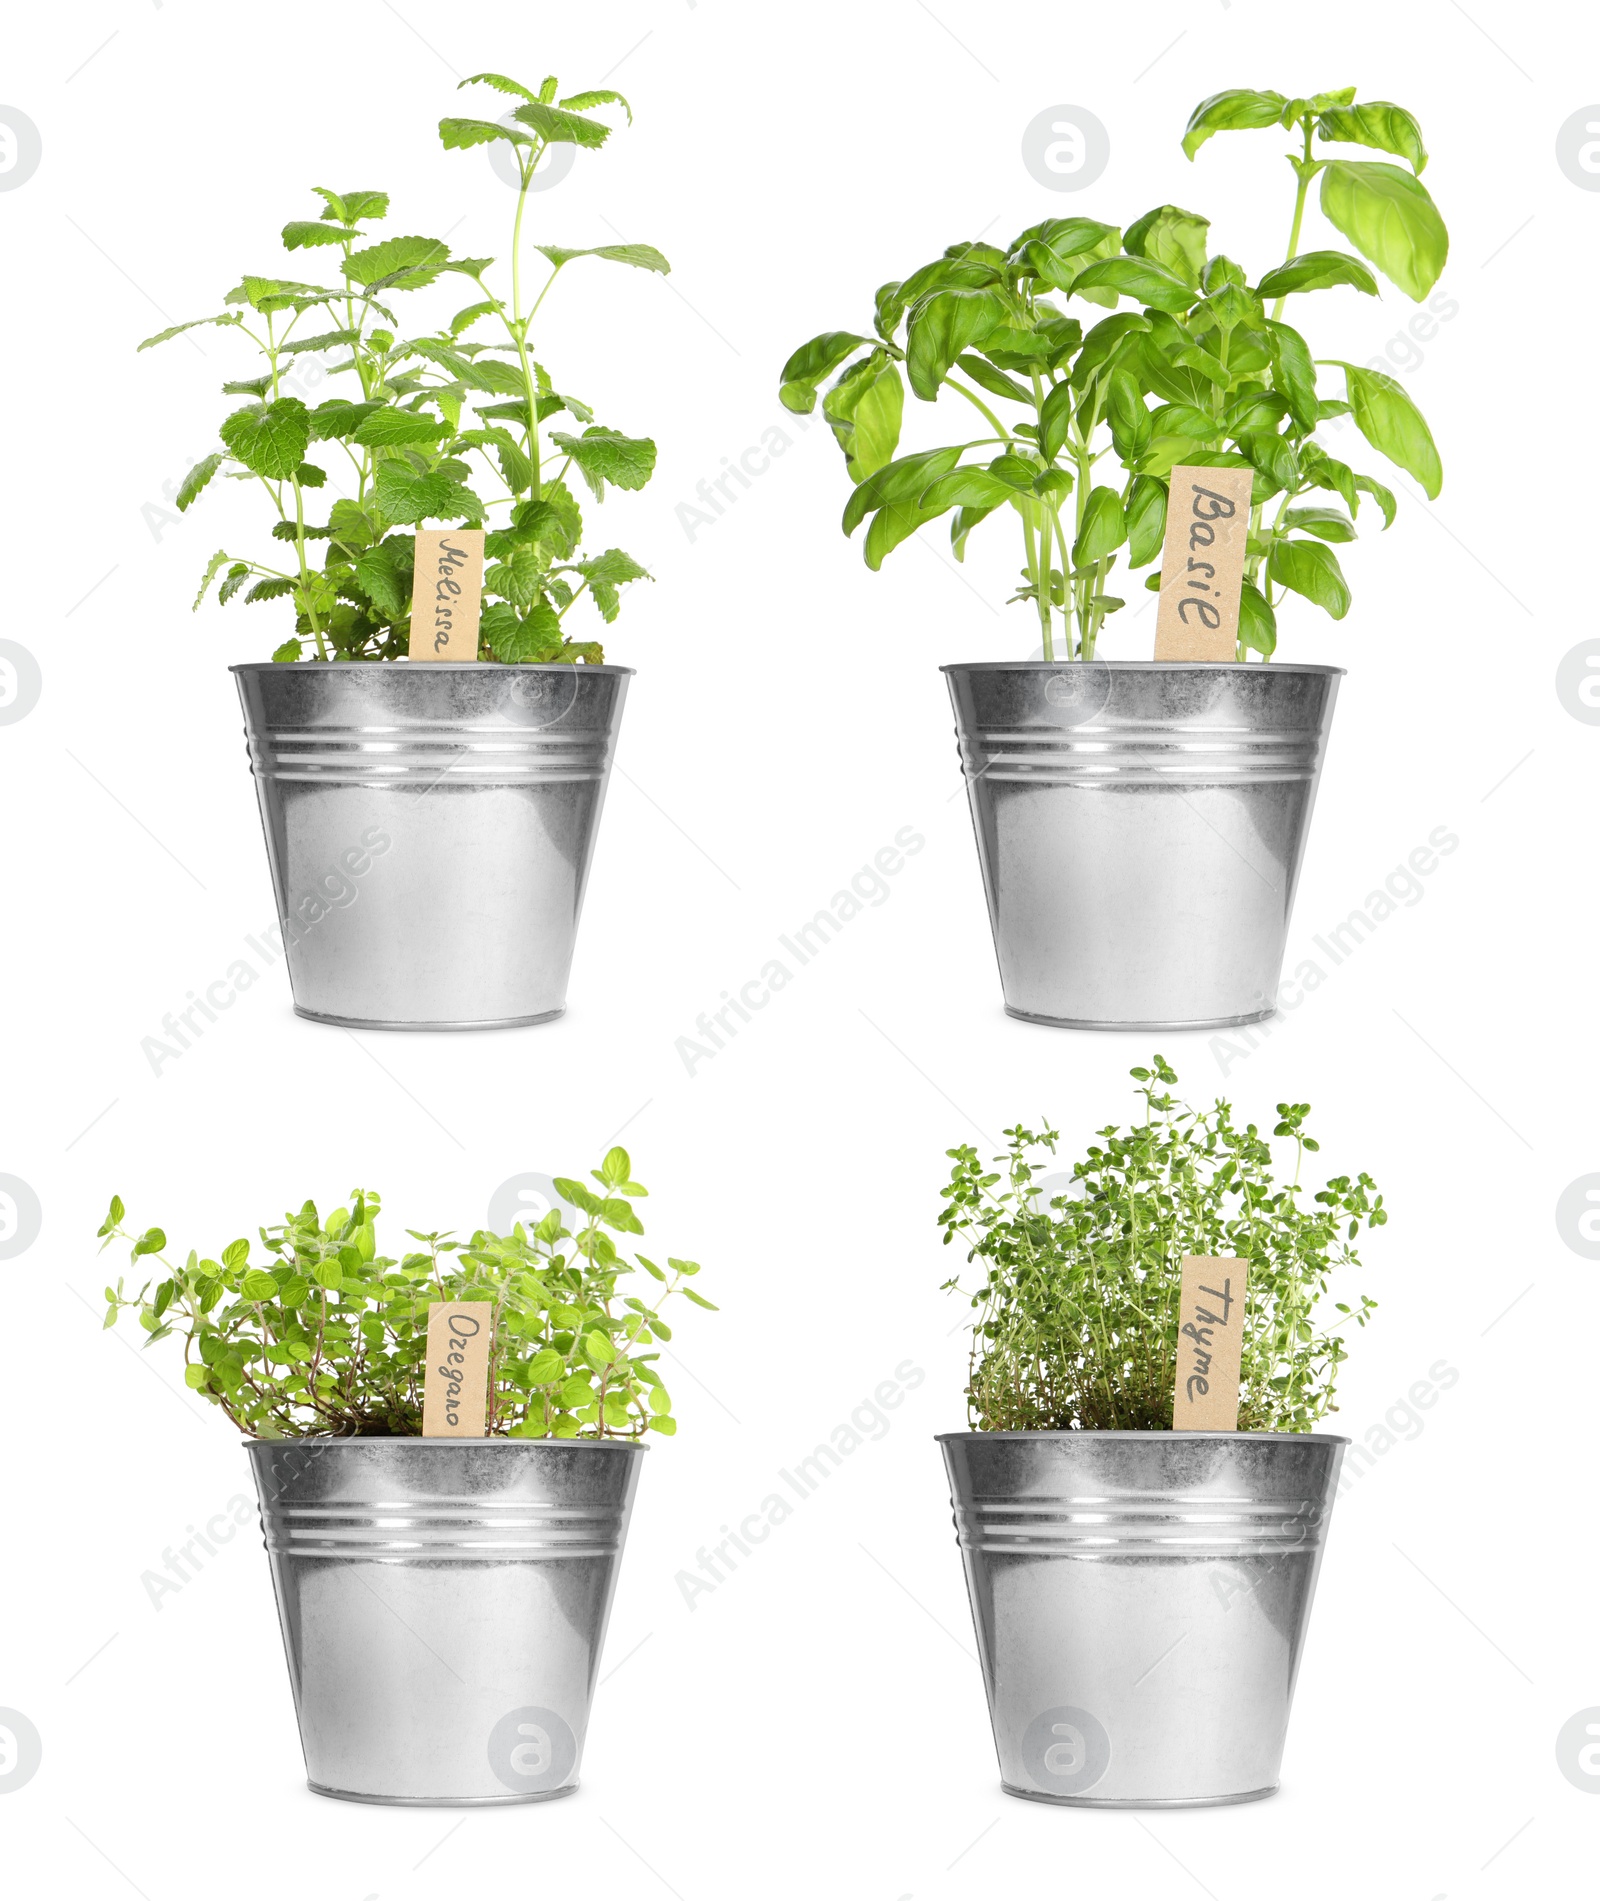 Image of Collage with different herbs growing in pots isolated on white. Thyme, oregano, melissa and basil